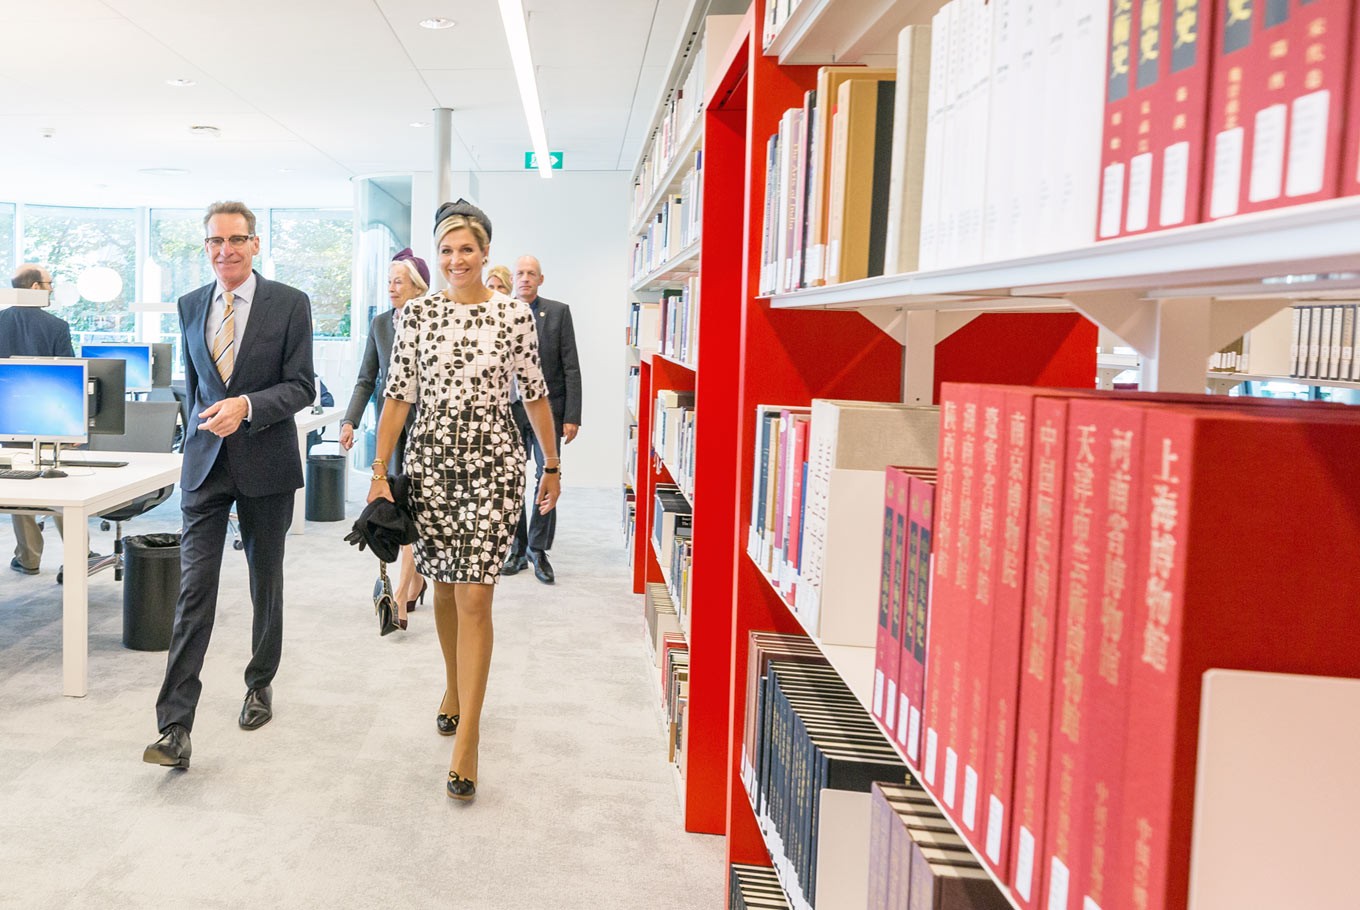 Royal inspection: Queen Máxima of the Netherlands (right) walks through the Asian Library, accompanied by KITLV head Geert Oostindie. (Leiden University/Monique Shaw)